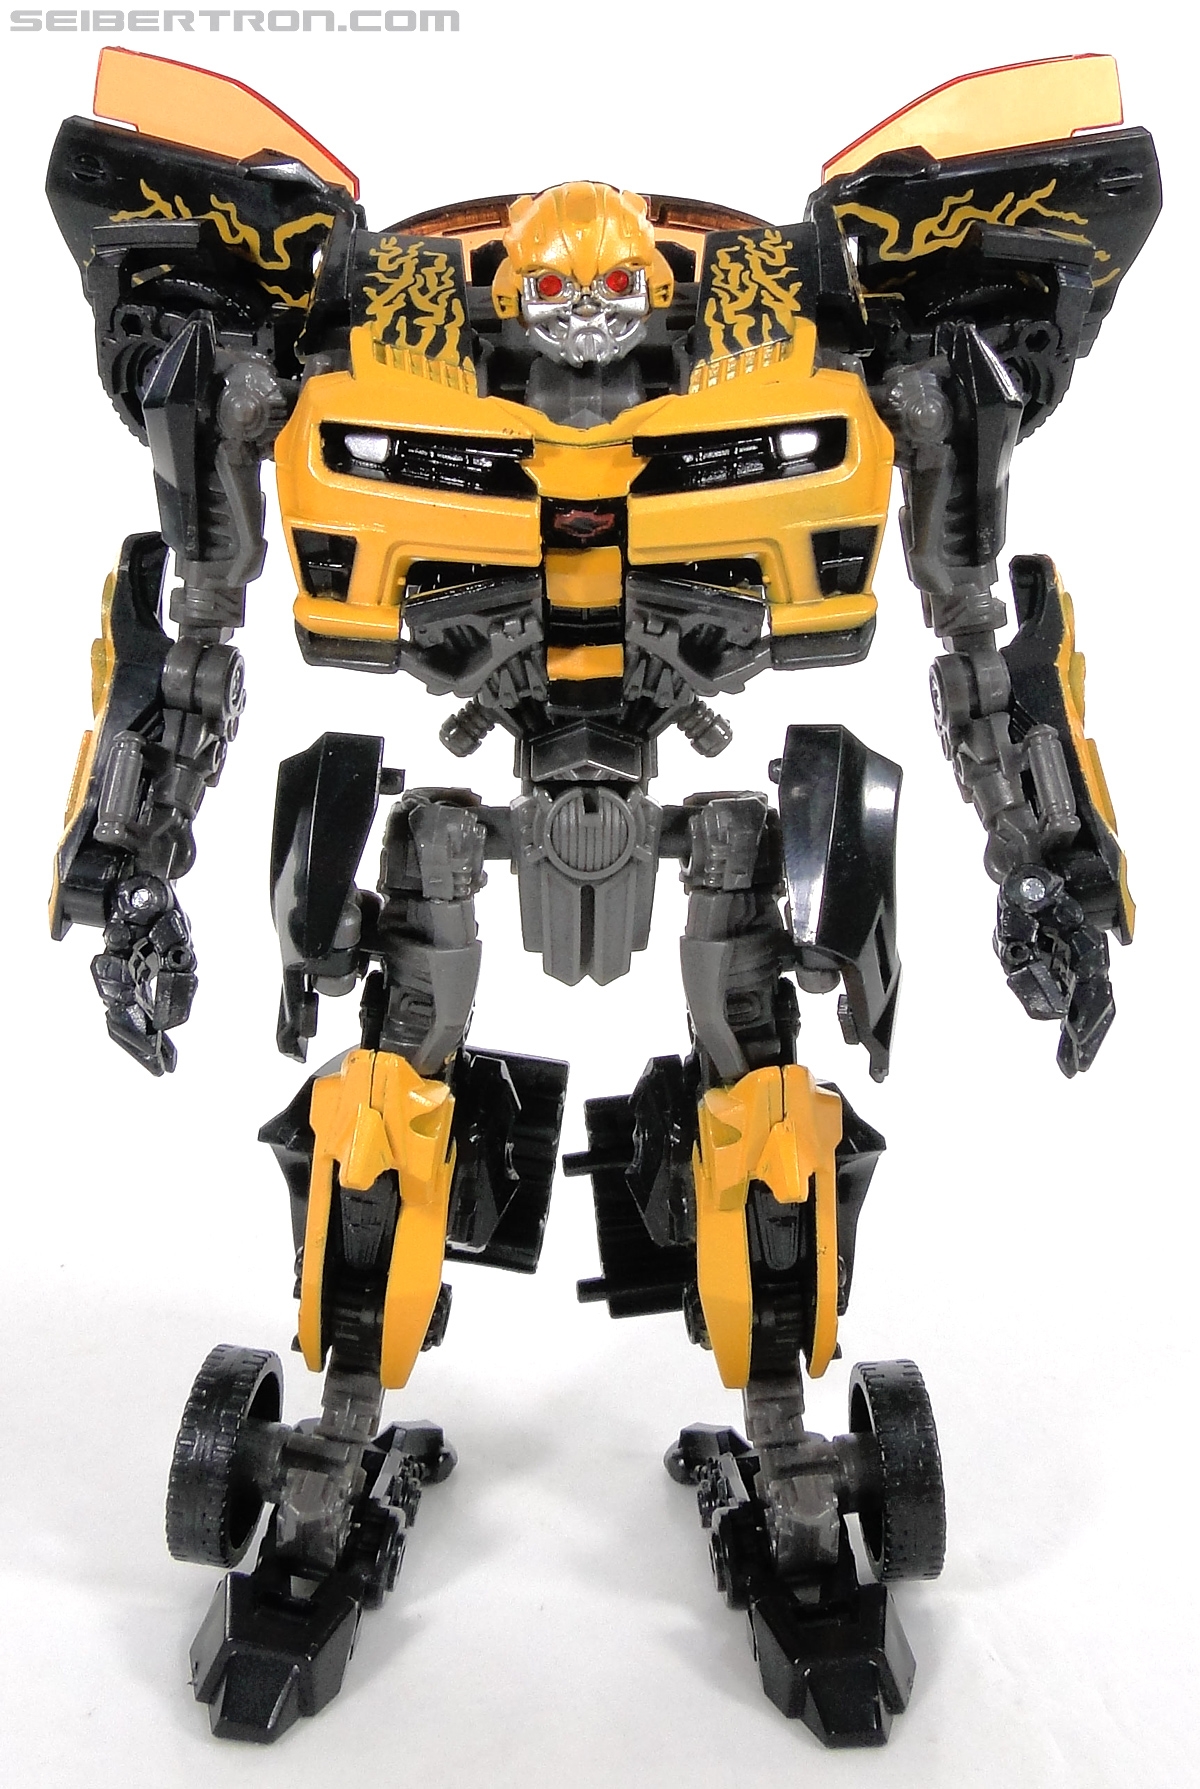 Bumble Bee Toys 31